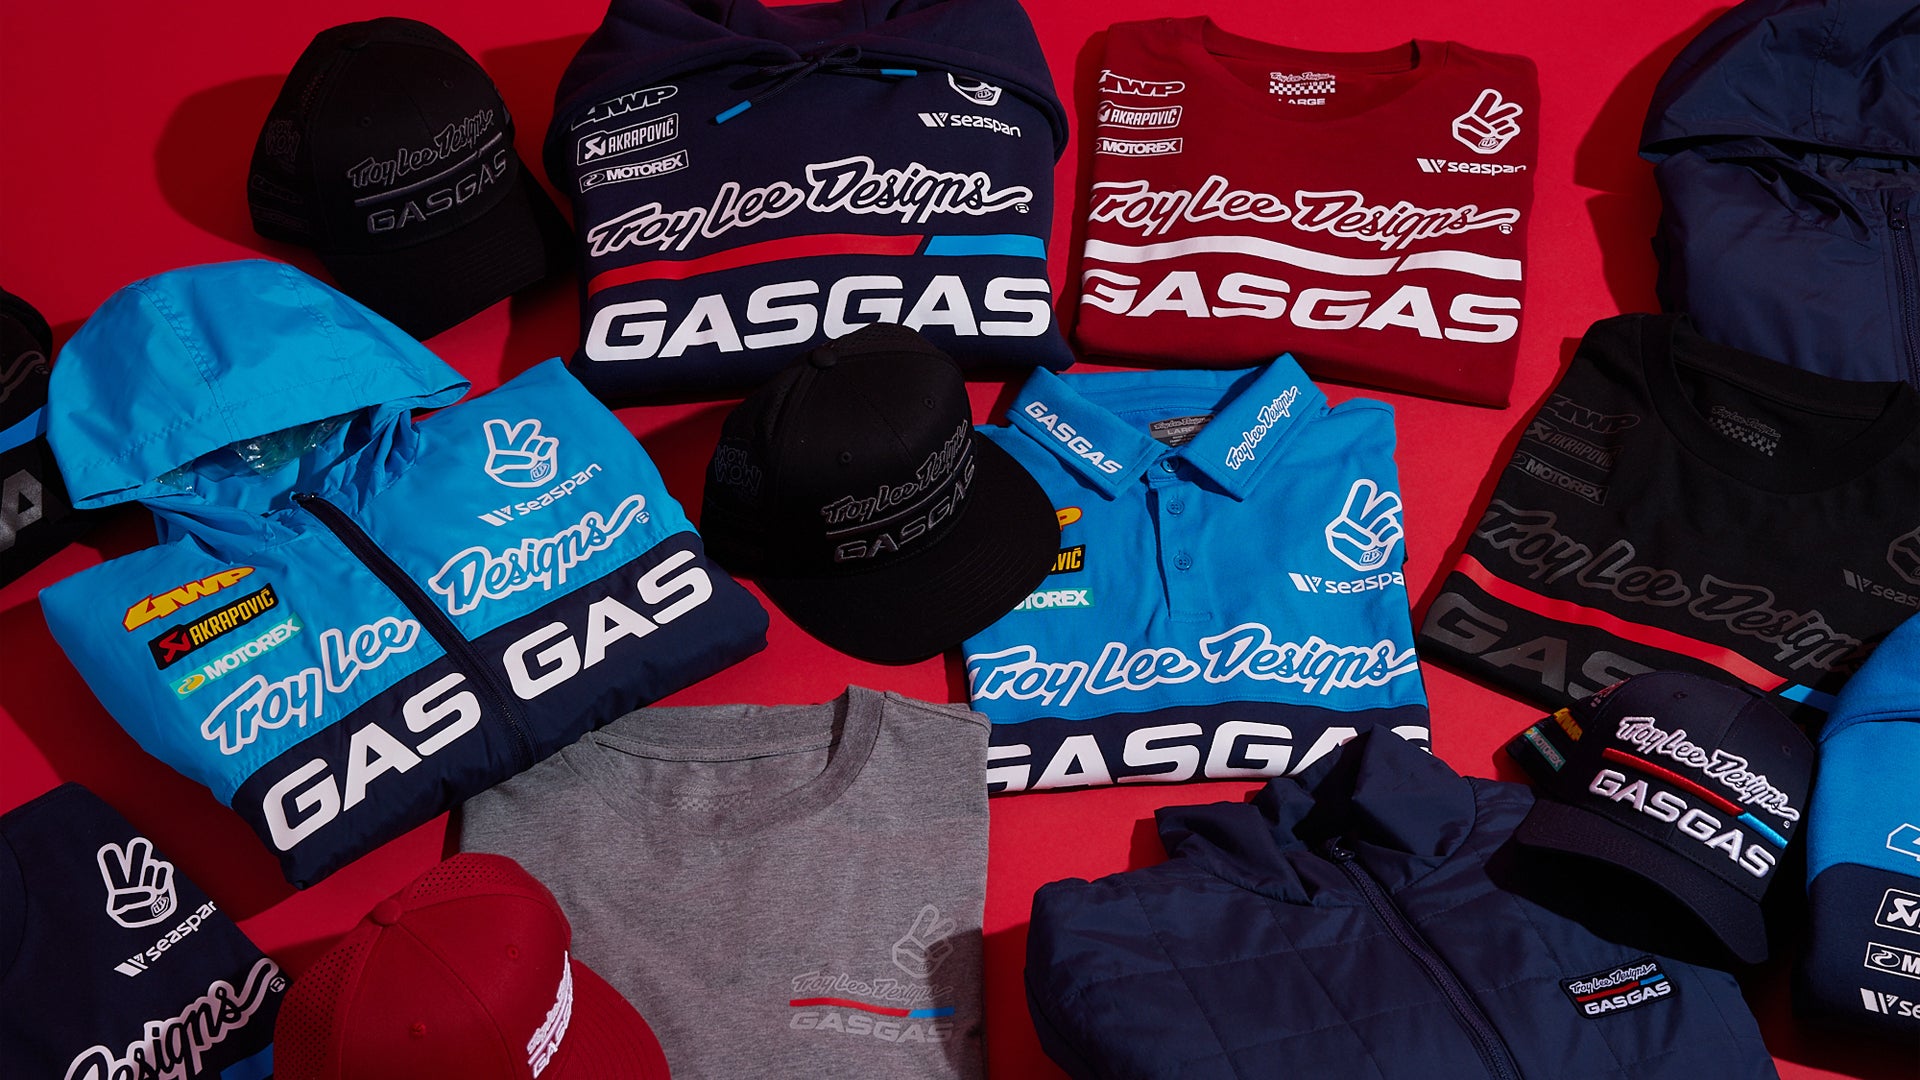 Troy Lee Designs / GASGAS Team Collection